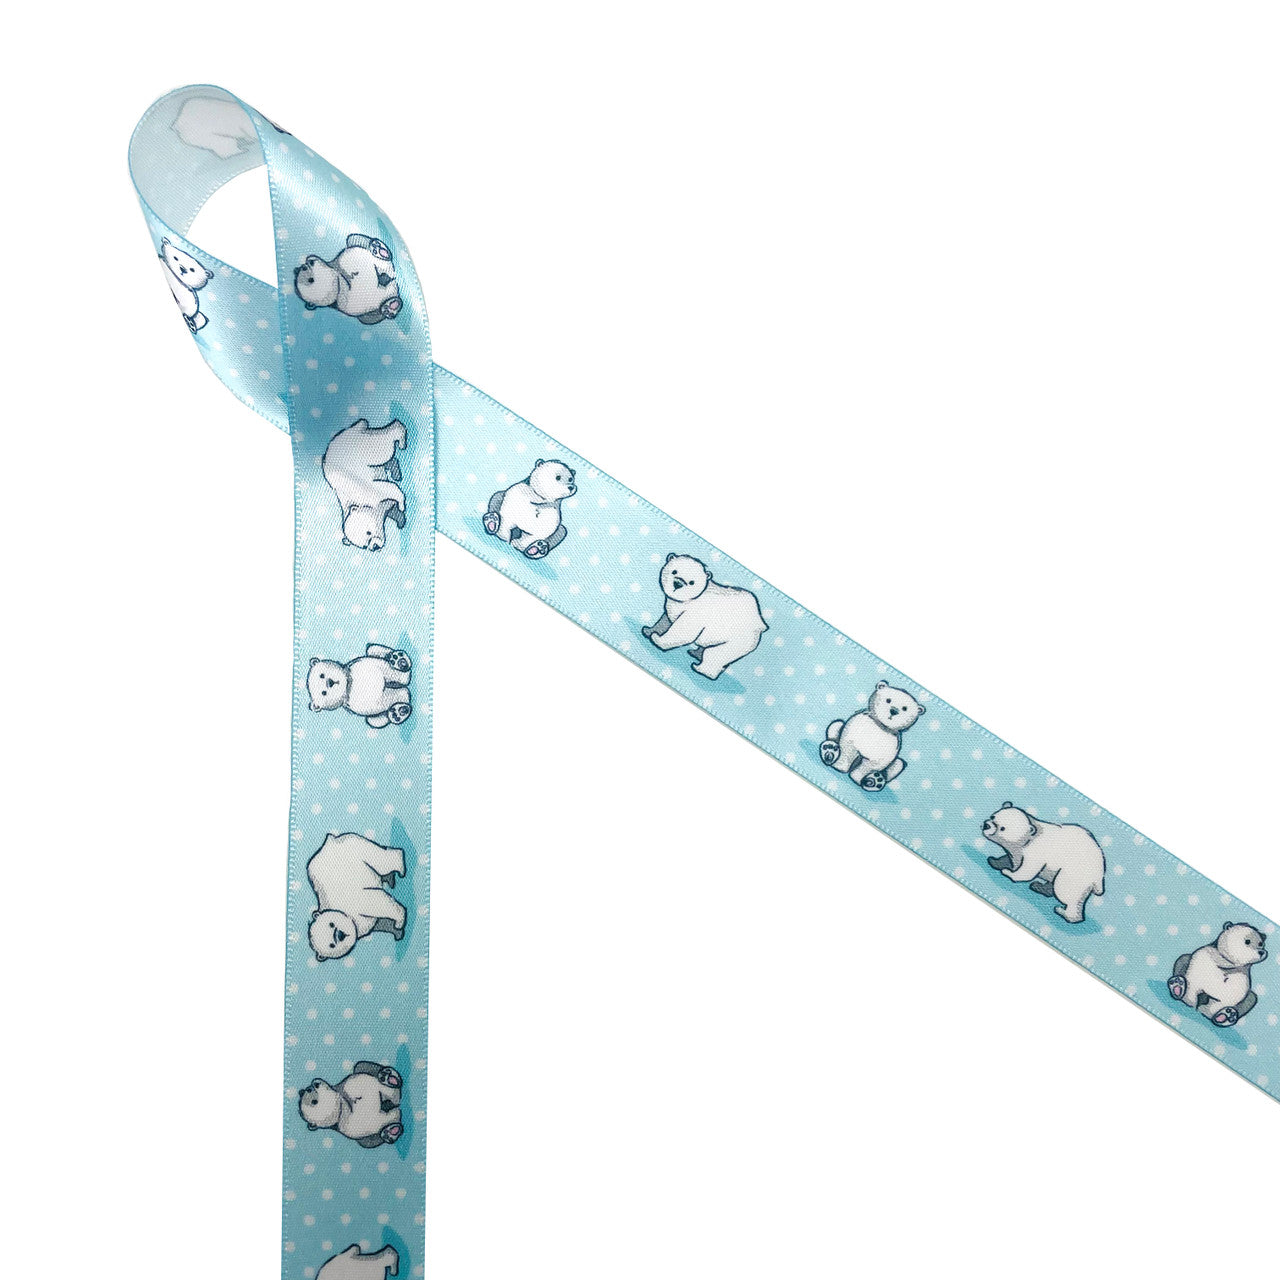 Polar bear ribbon featuring baby Polar bears sitting and standing on a light blue background with white polka dots printed on 5/8" white single face satin ribbon is the perfect ribbon for baby gifts, baby showers, baby reveal parties and Christmas! Every Polar Bear  lover will appreciate this sweet tie on gift wrap, gift baskets, shower favors, Christmas gifts, craft projects and quilting. All our ribbon is designed and printed in the USA